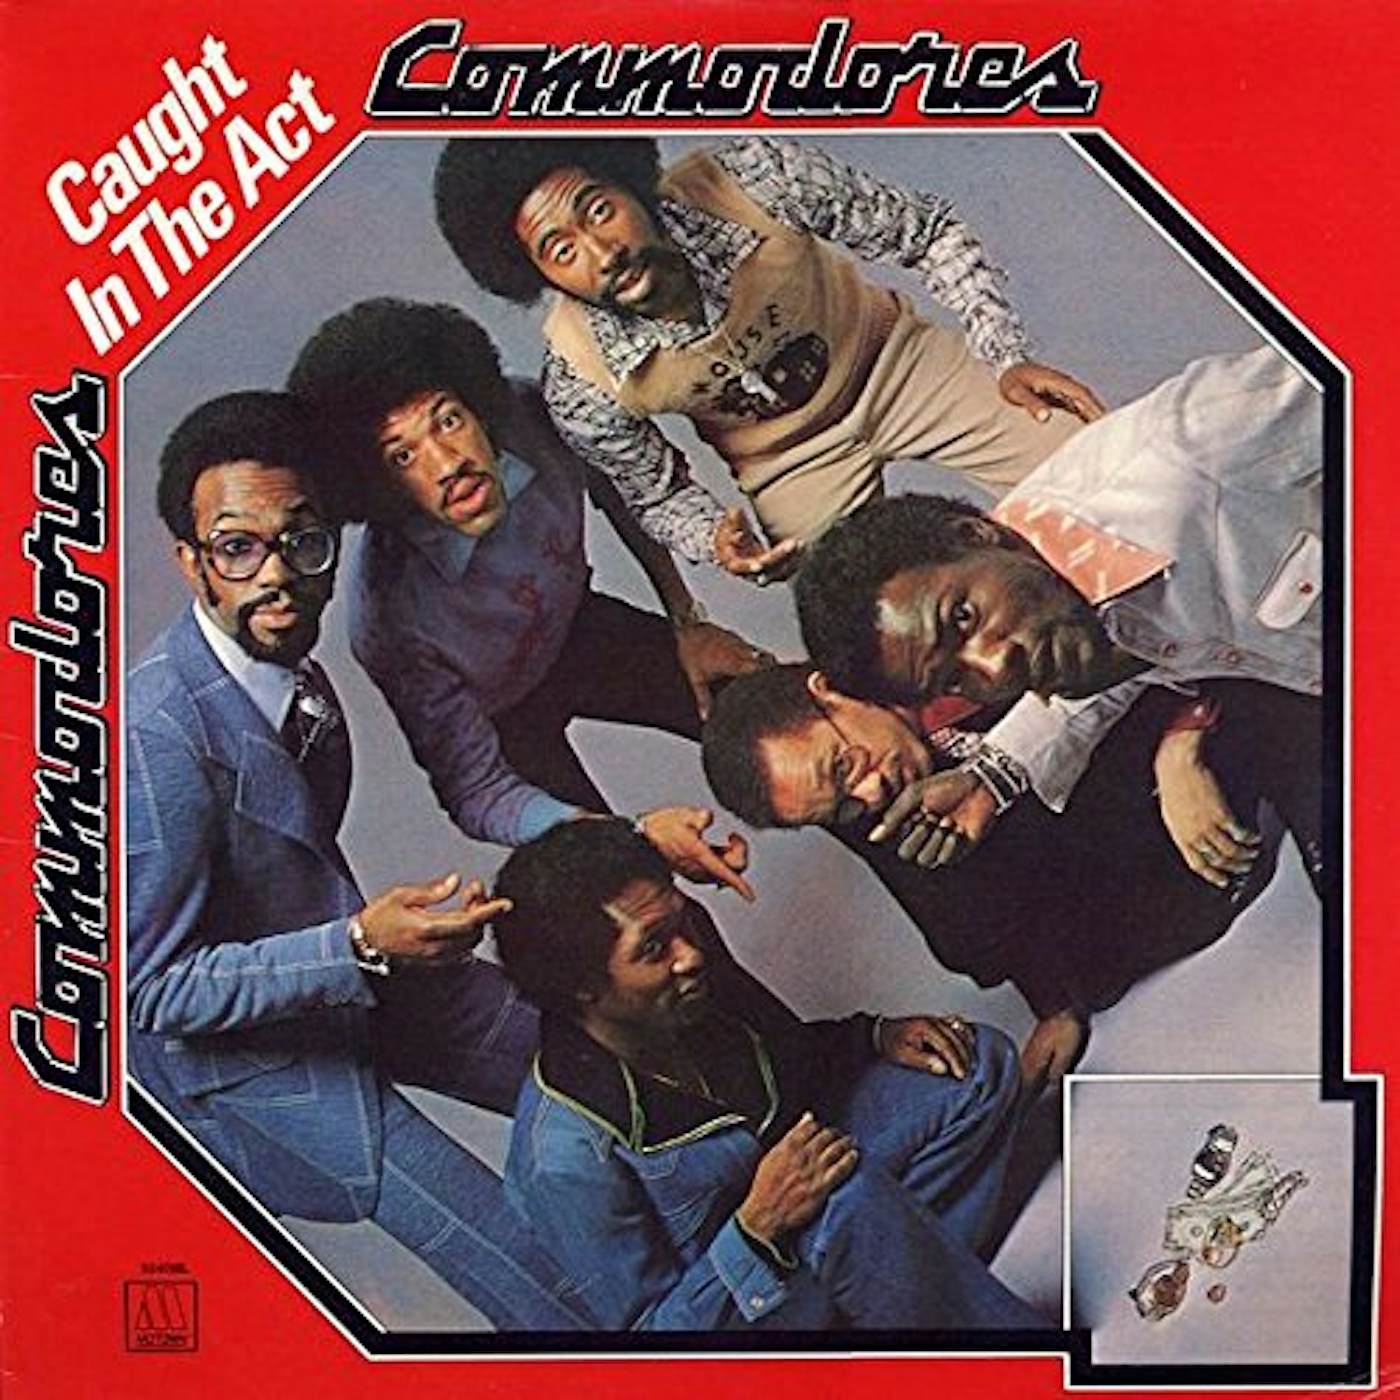 Commodores CAUGHT IN THE ACT CD